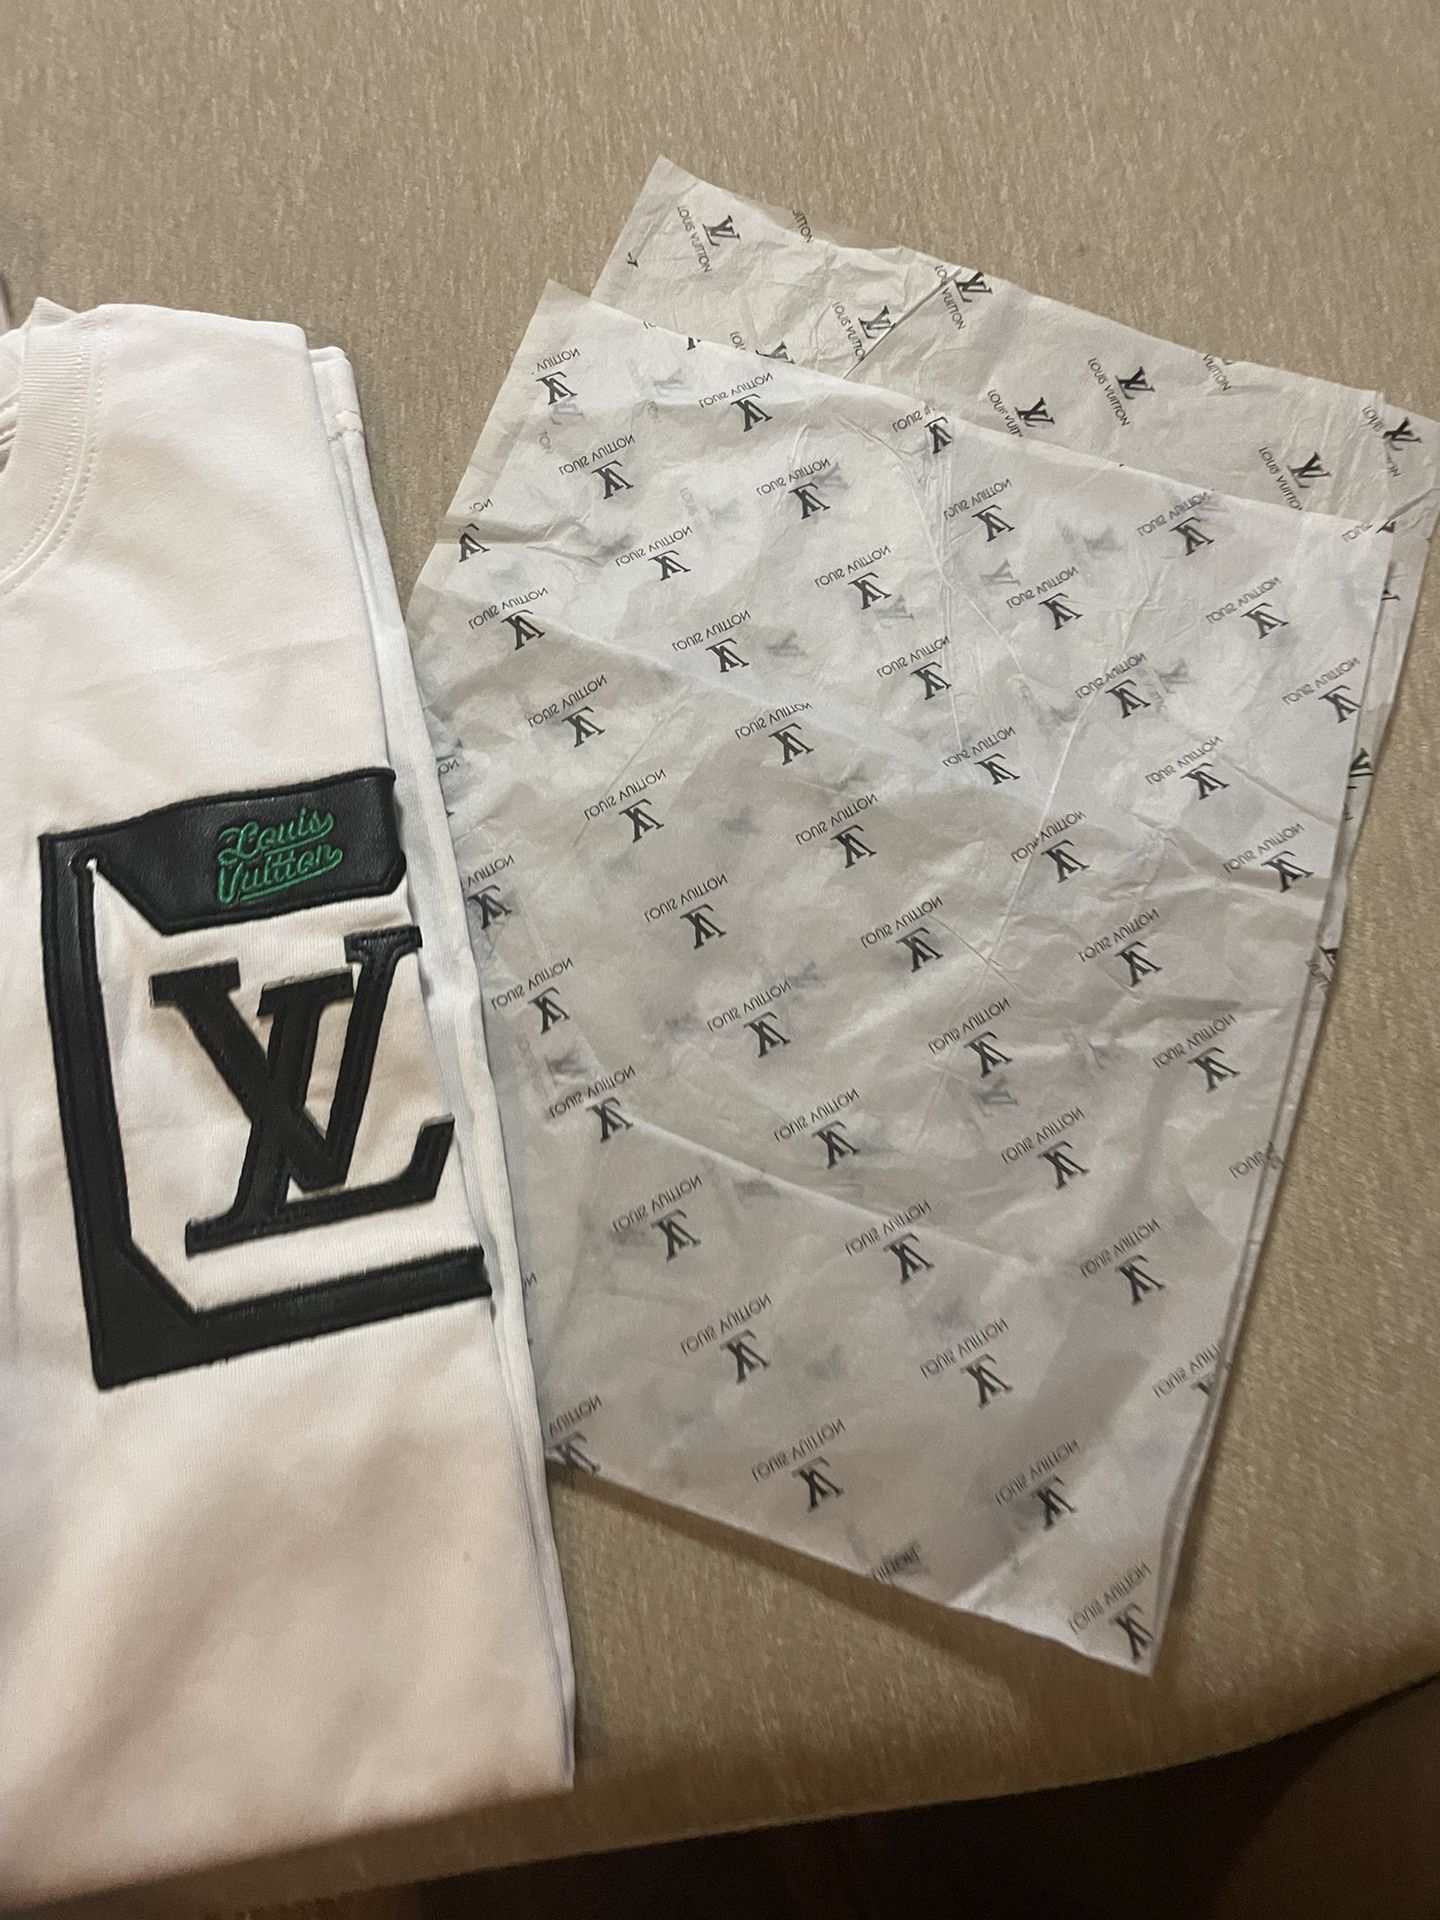 Louis Vuitton T-shirt Brand New OG 100% Cotton for Sale in